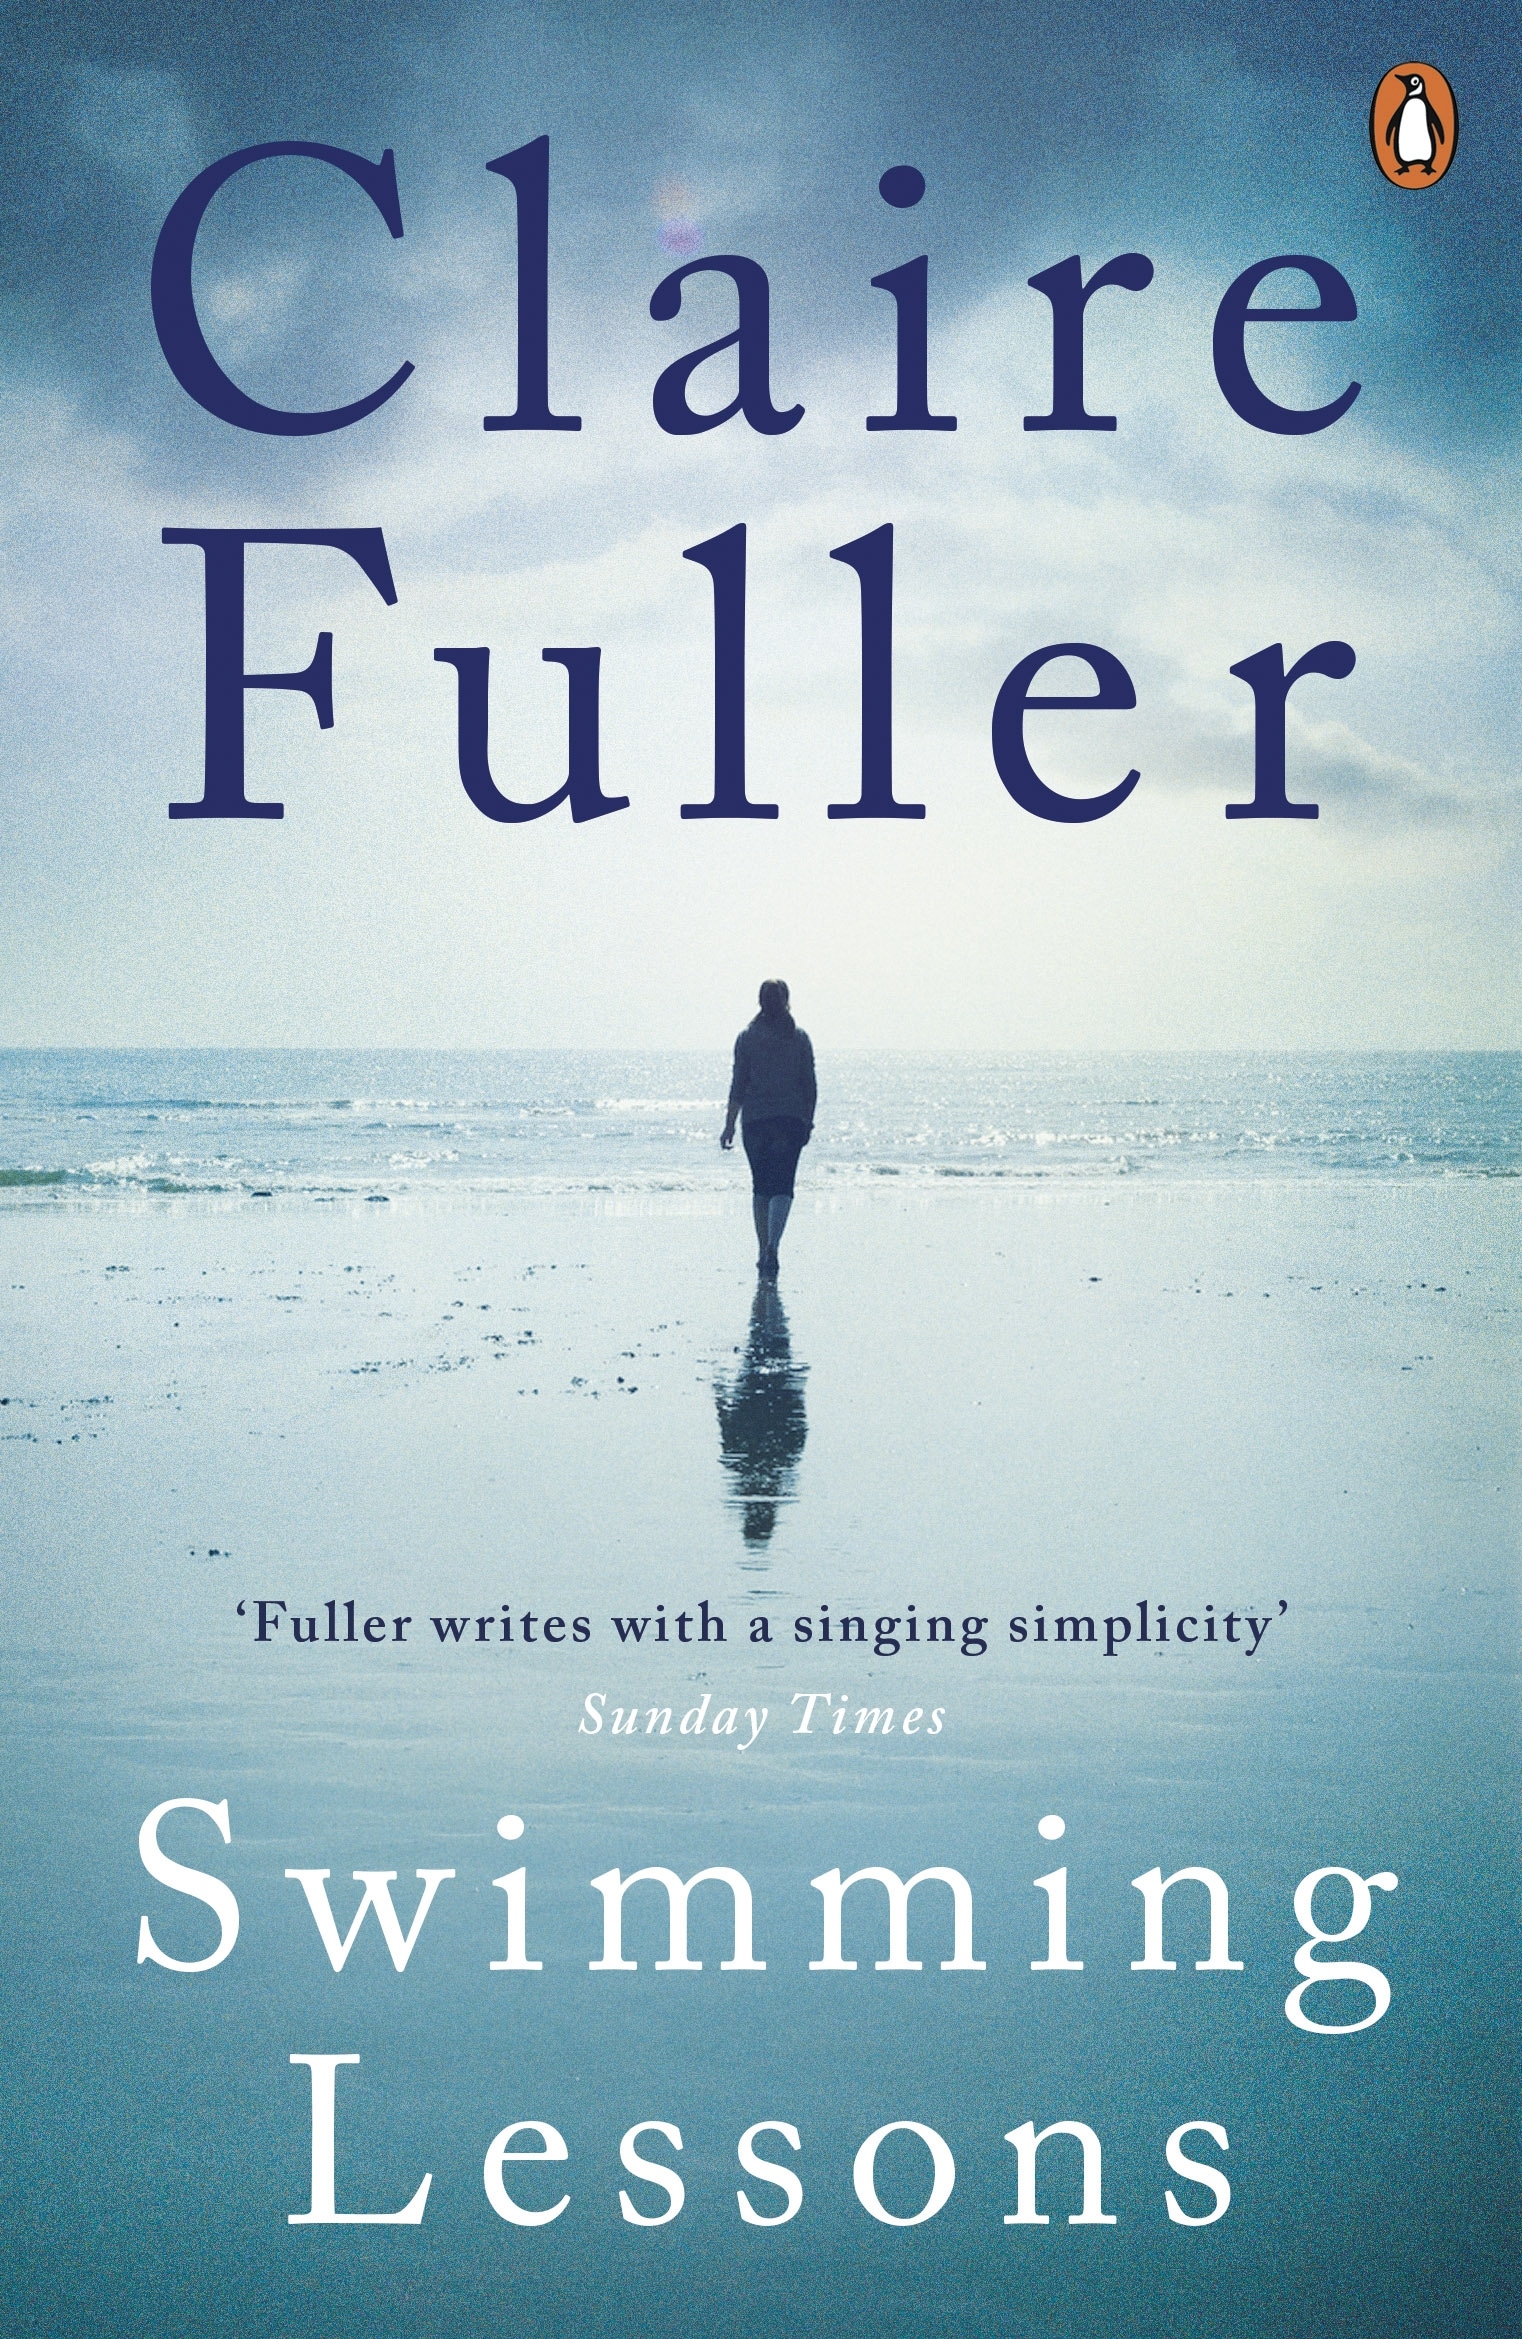 Book “Swimming Lessons” by Claire Fuller — February 1, 2018